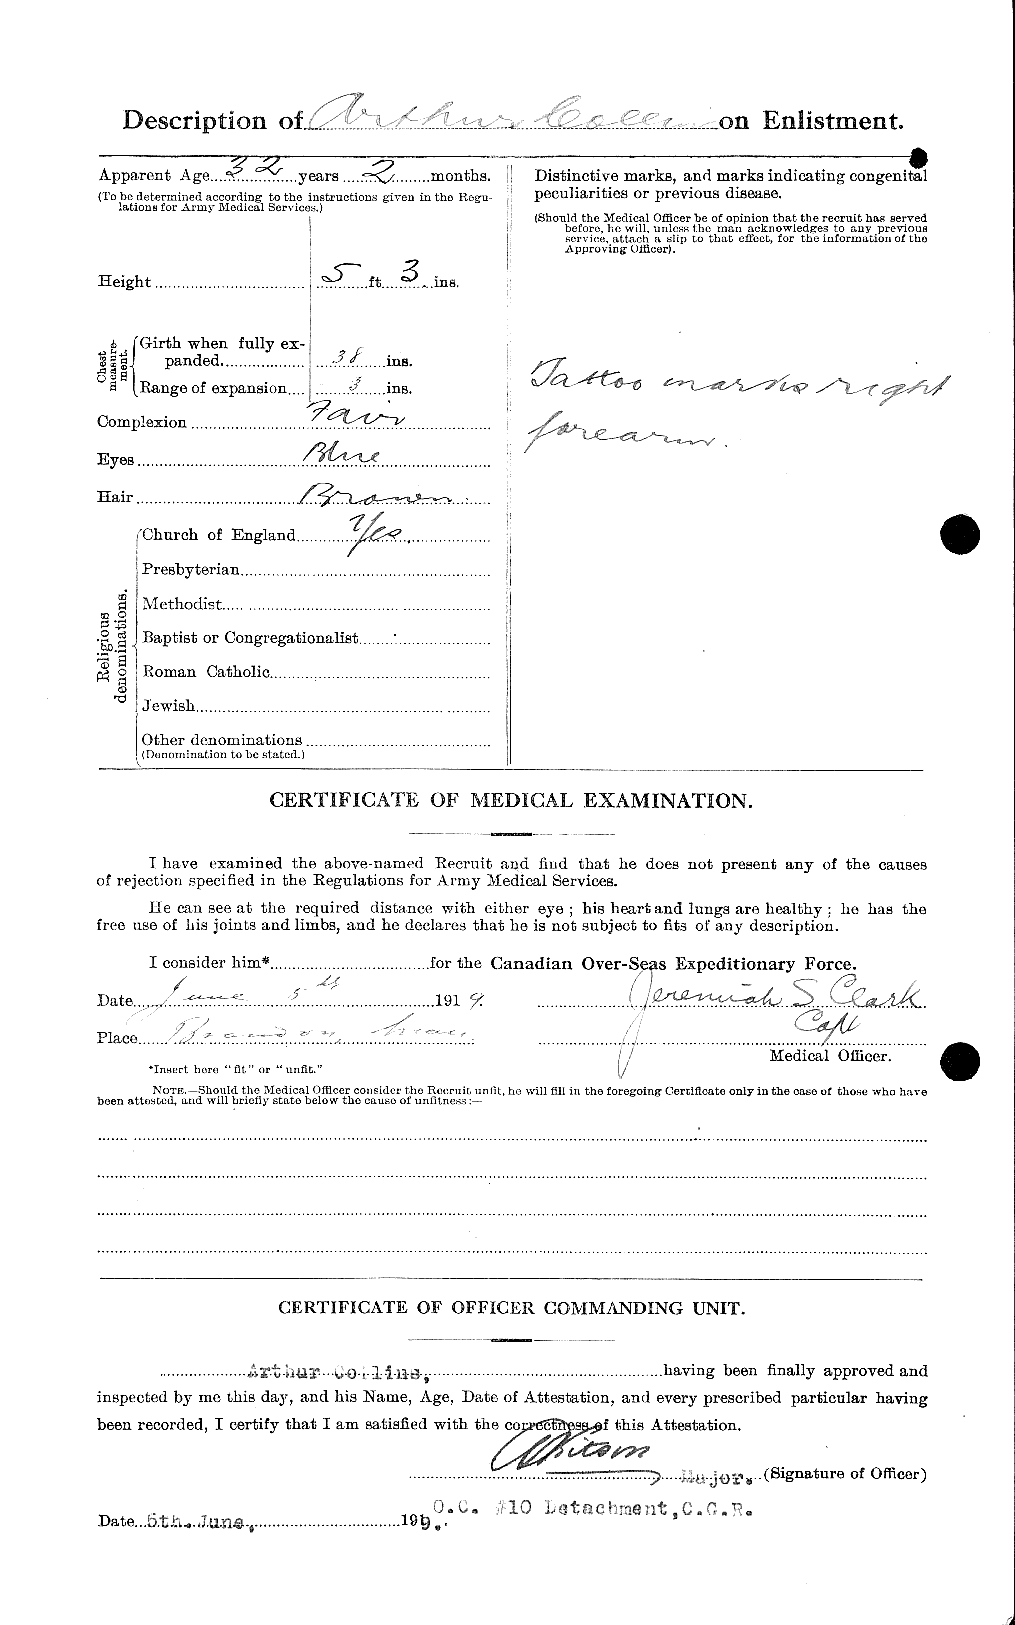 Personnel Records of the First World War - CEF 028980d